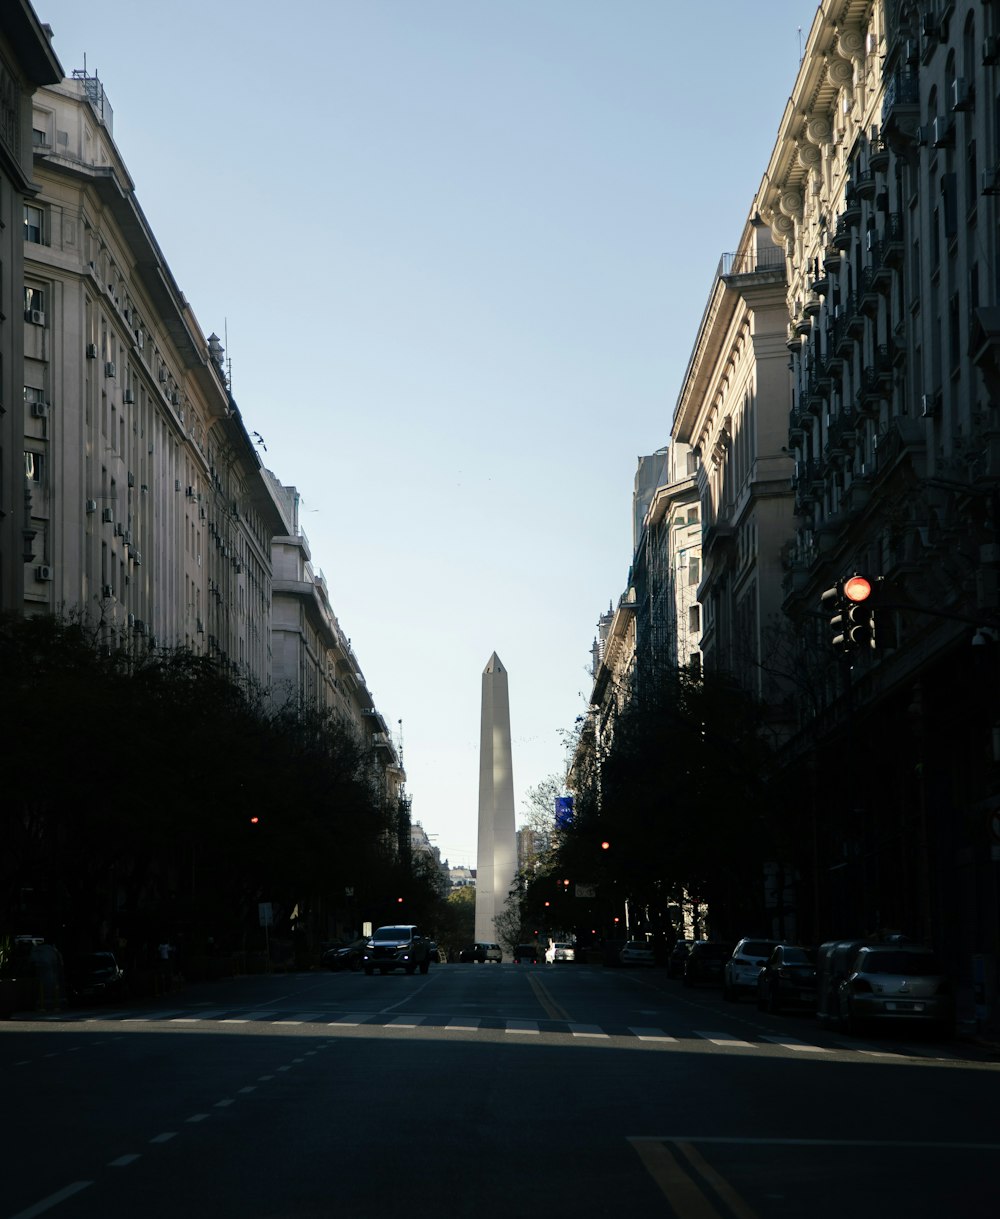 a city street with tall buildings and a tall obelisk